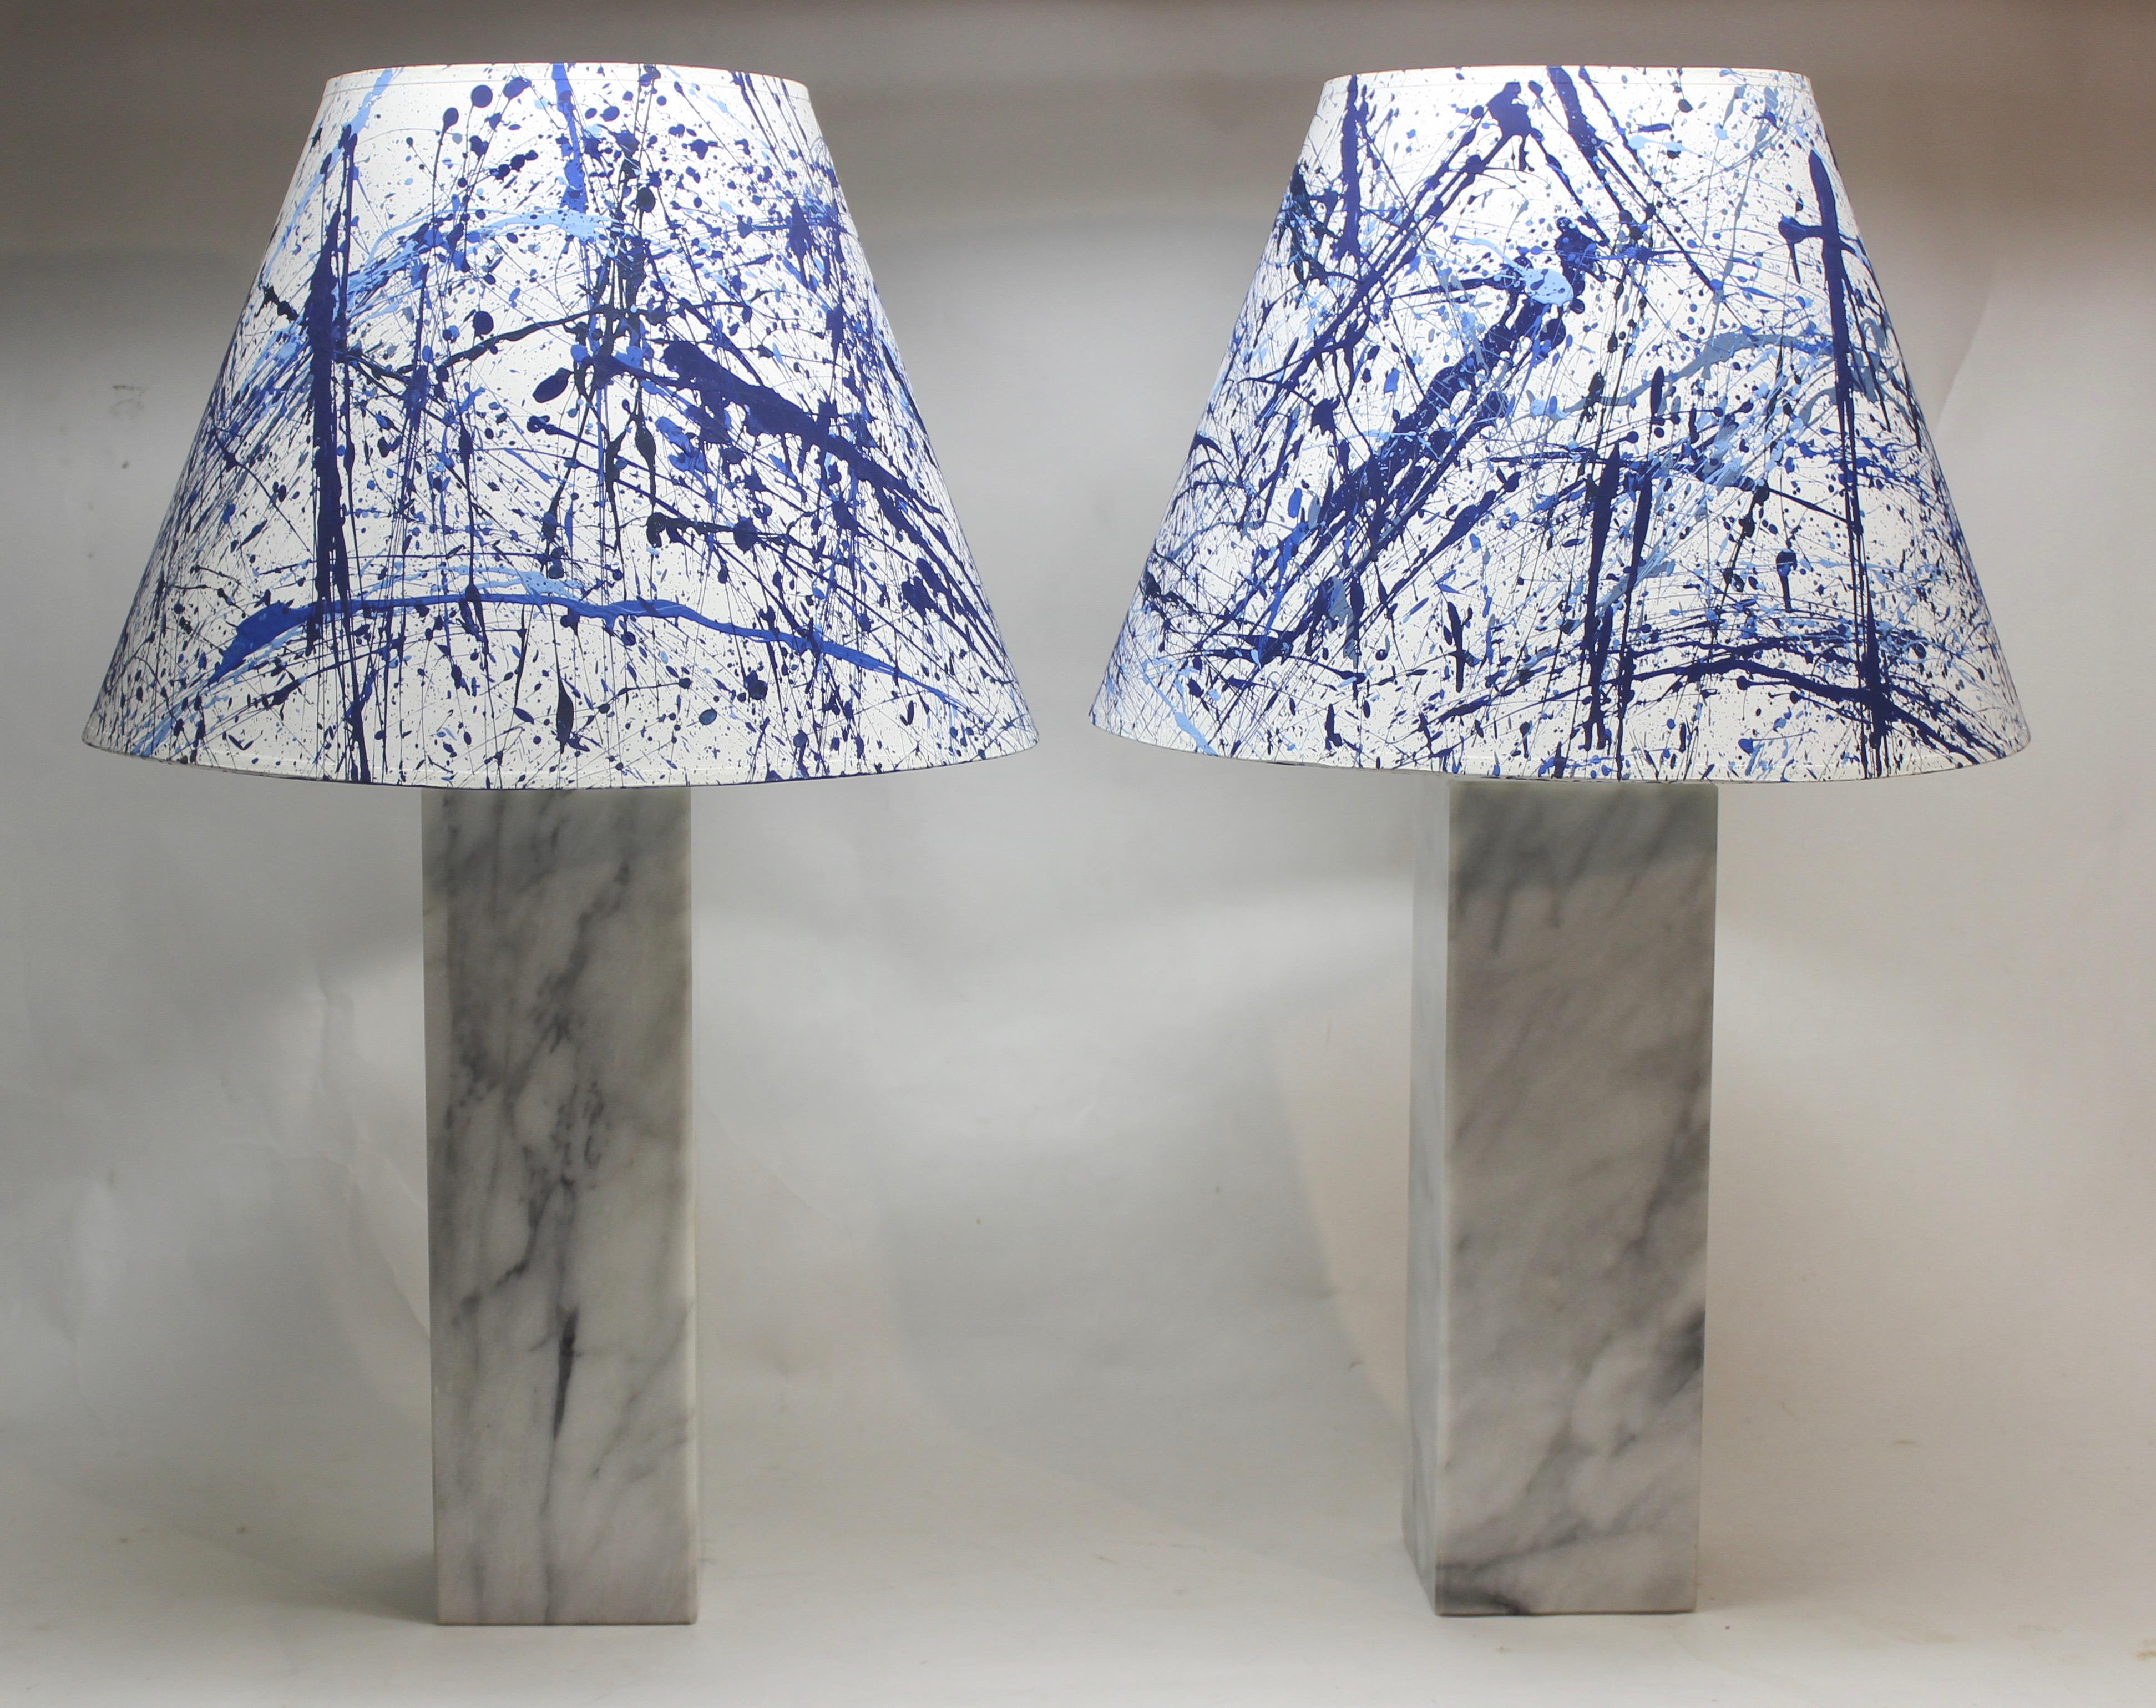 Pair of marble table lamps. Shades not included.

Base measures 16